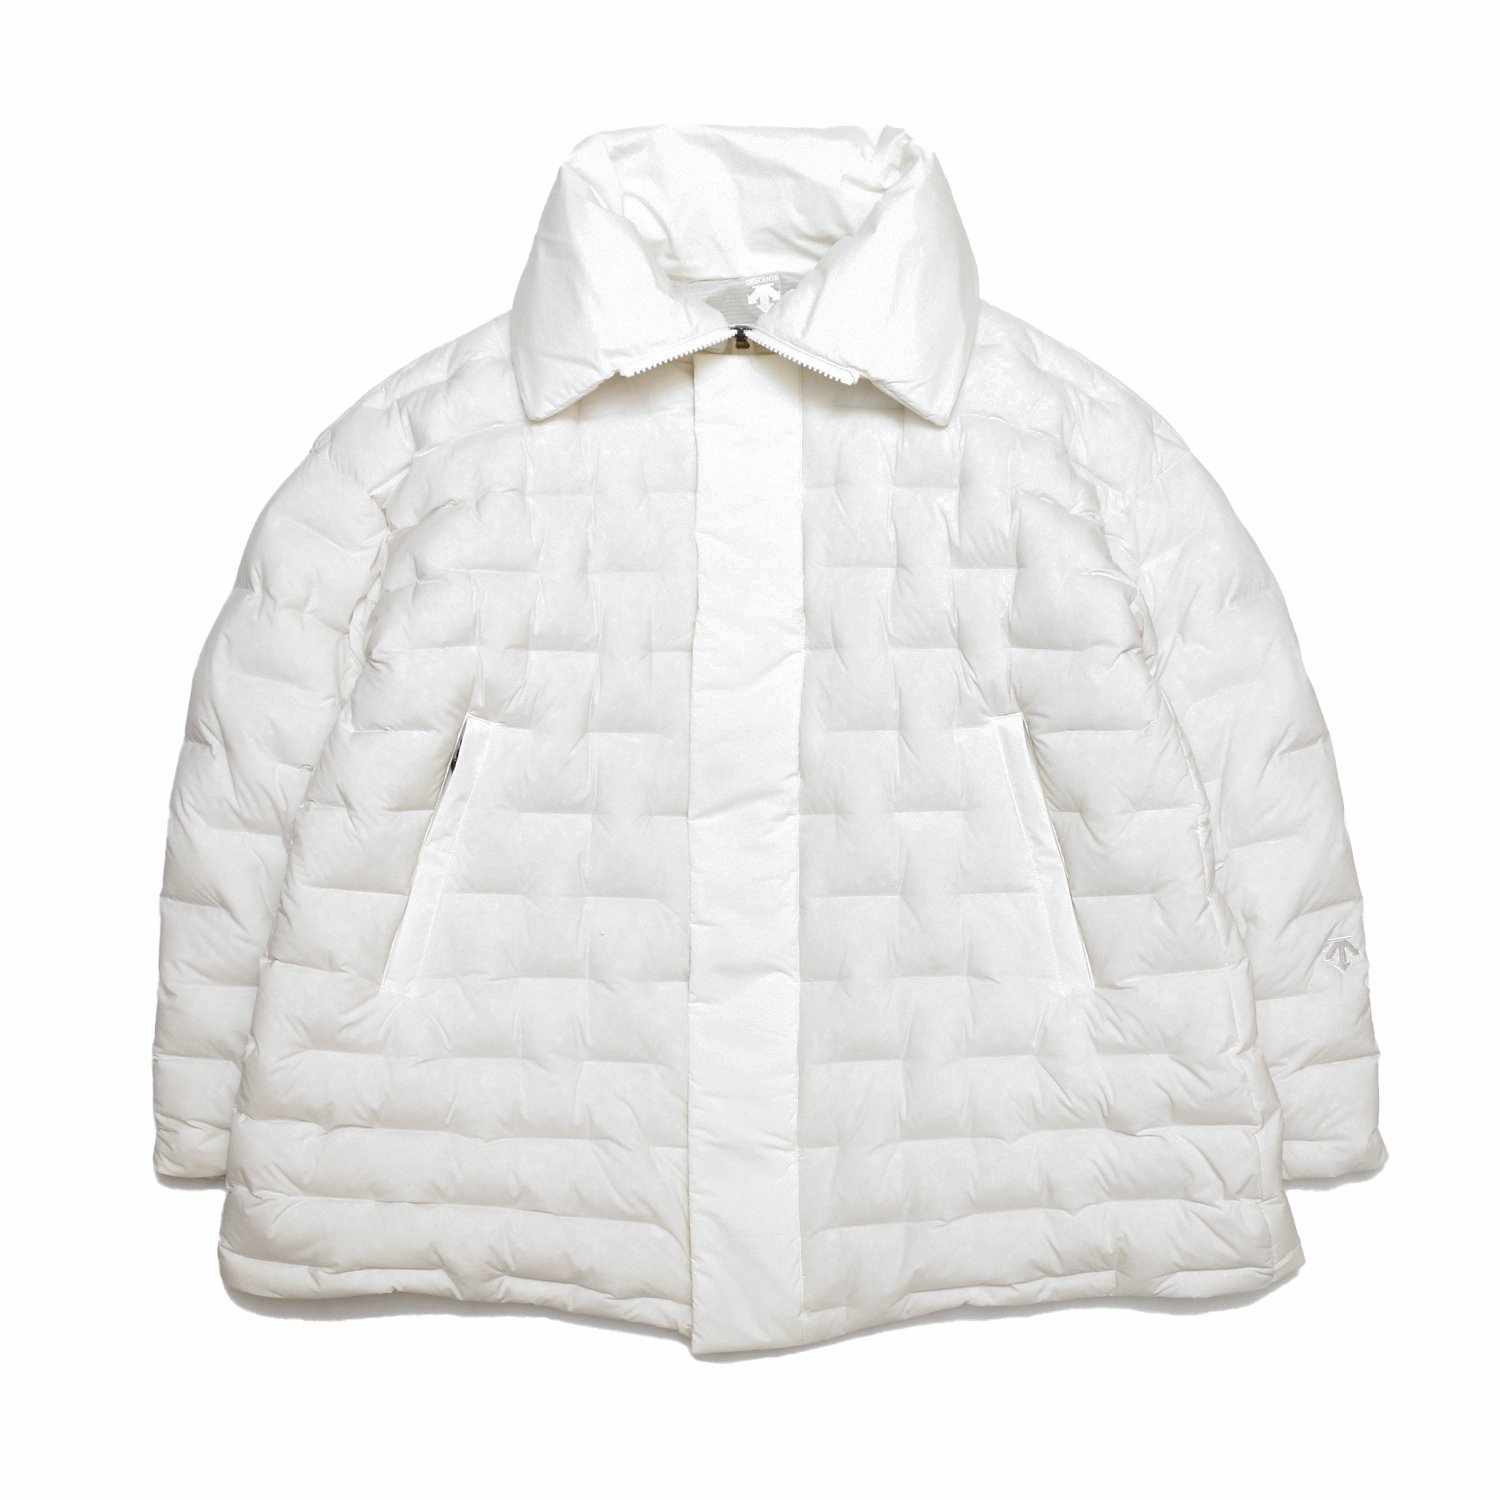 <img class='new_mark_img1' src='https://img.shop-pro.jp/img/new/icons8.gif' style='border:none;display:inline;margin:0px;padding:0px;width:auto;' />DESCENTE × ALWEL  / DIS DOWN HIGH COLLAR COAT